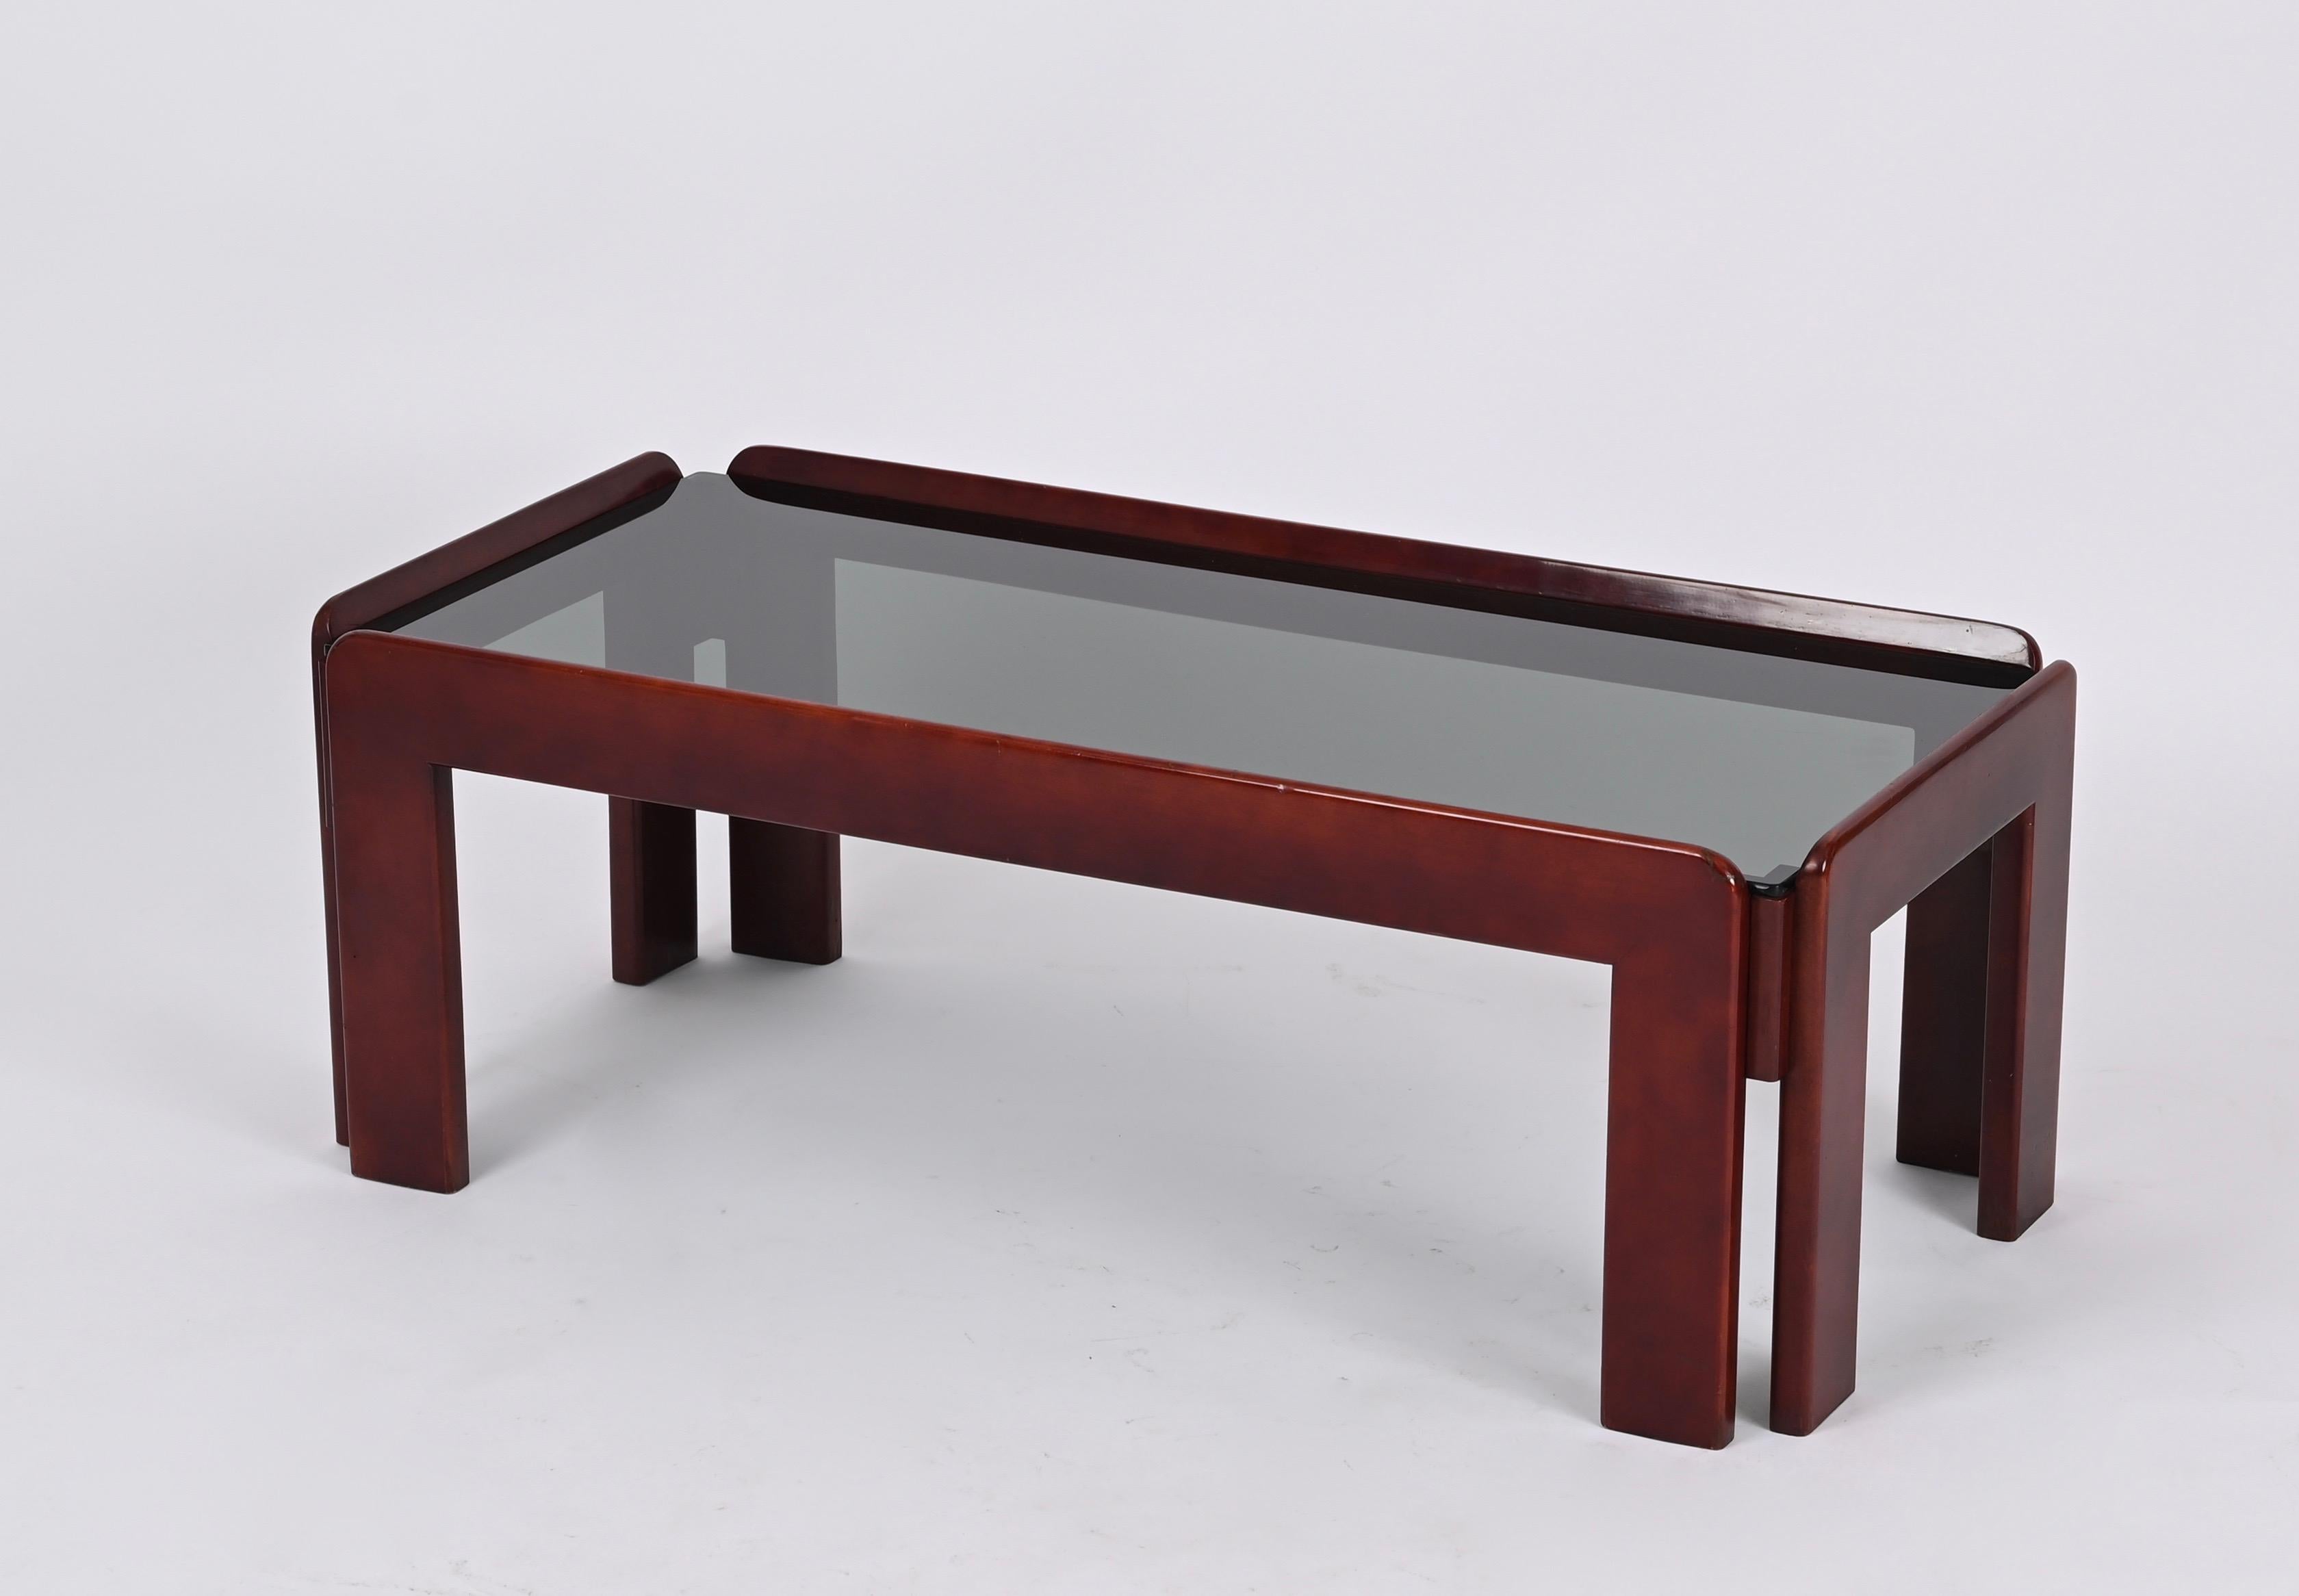 Afra & Tobia Scarpa Mid-Century Walnut Coffee Table for Cassina, Italy 1960s For Sale 3